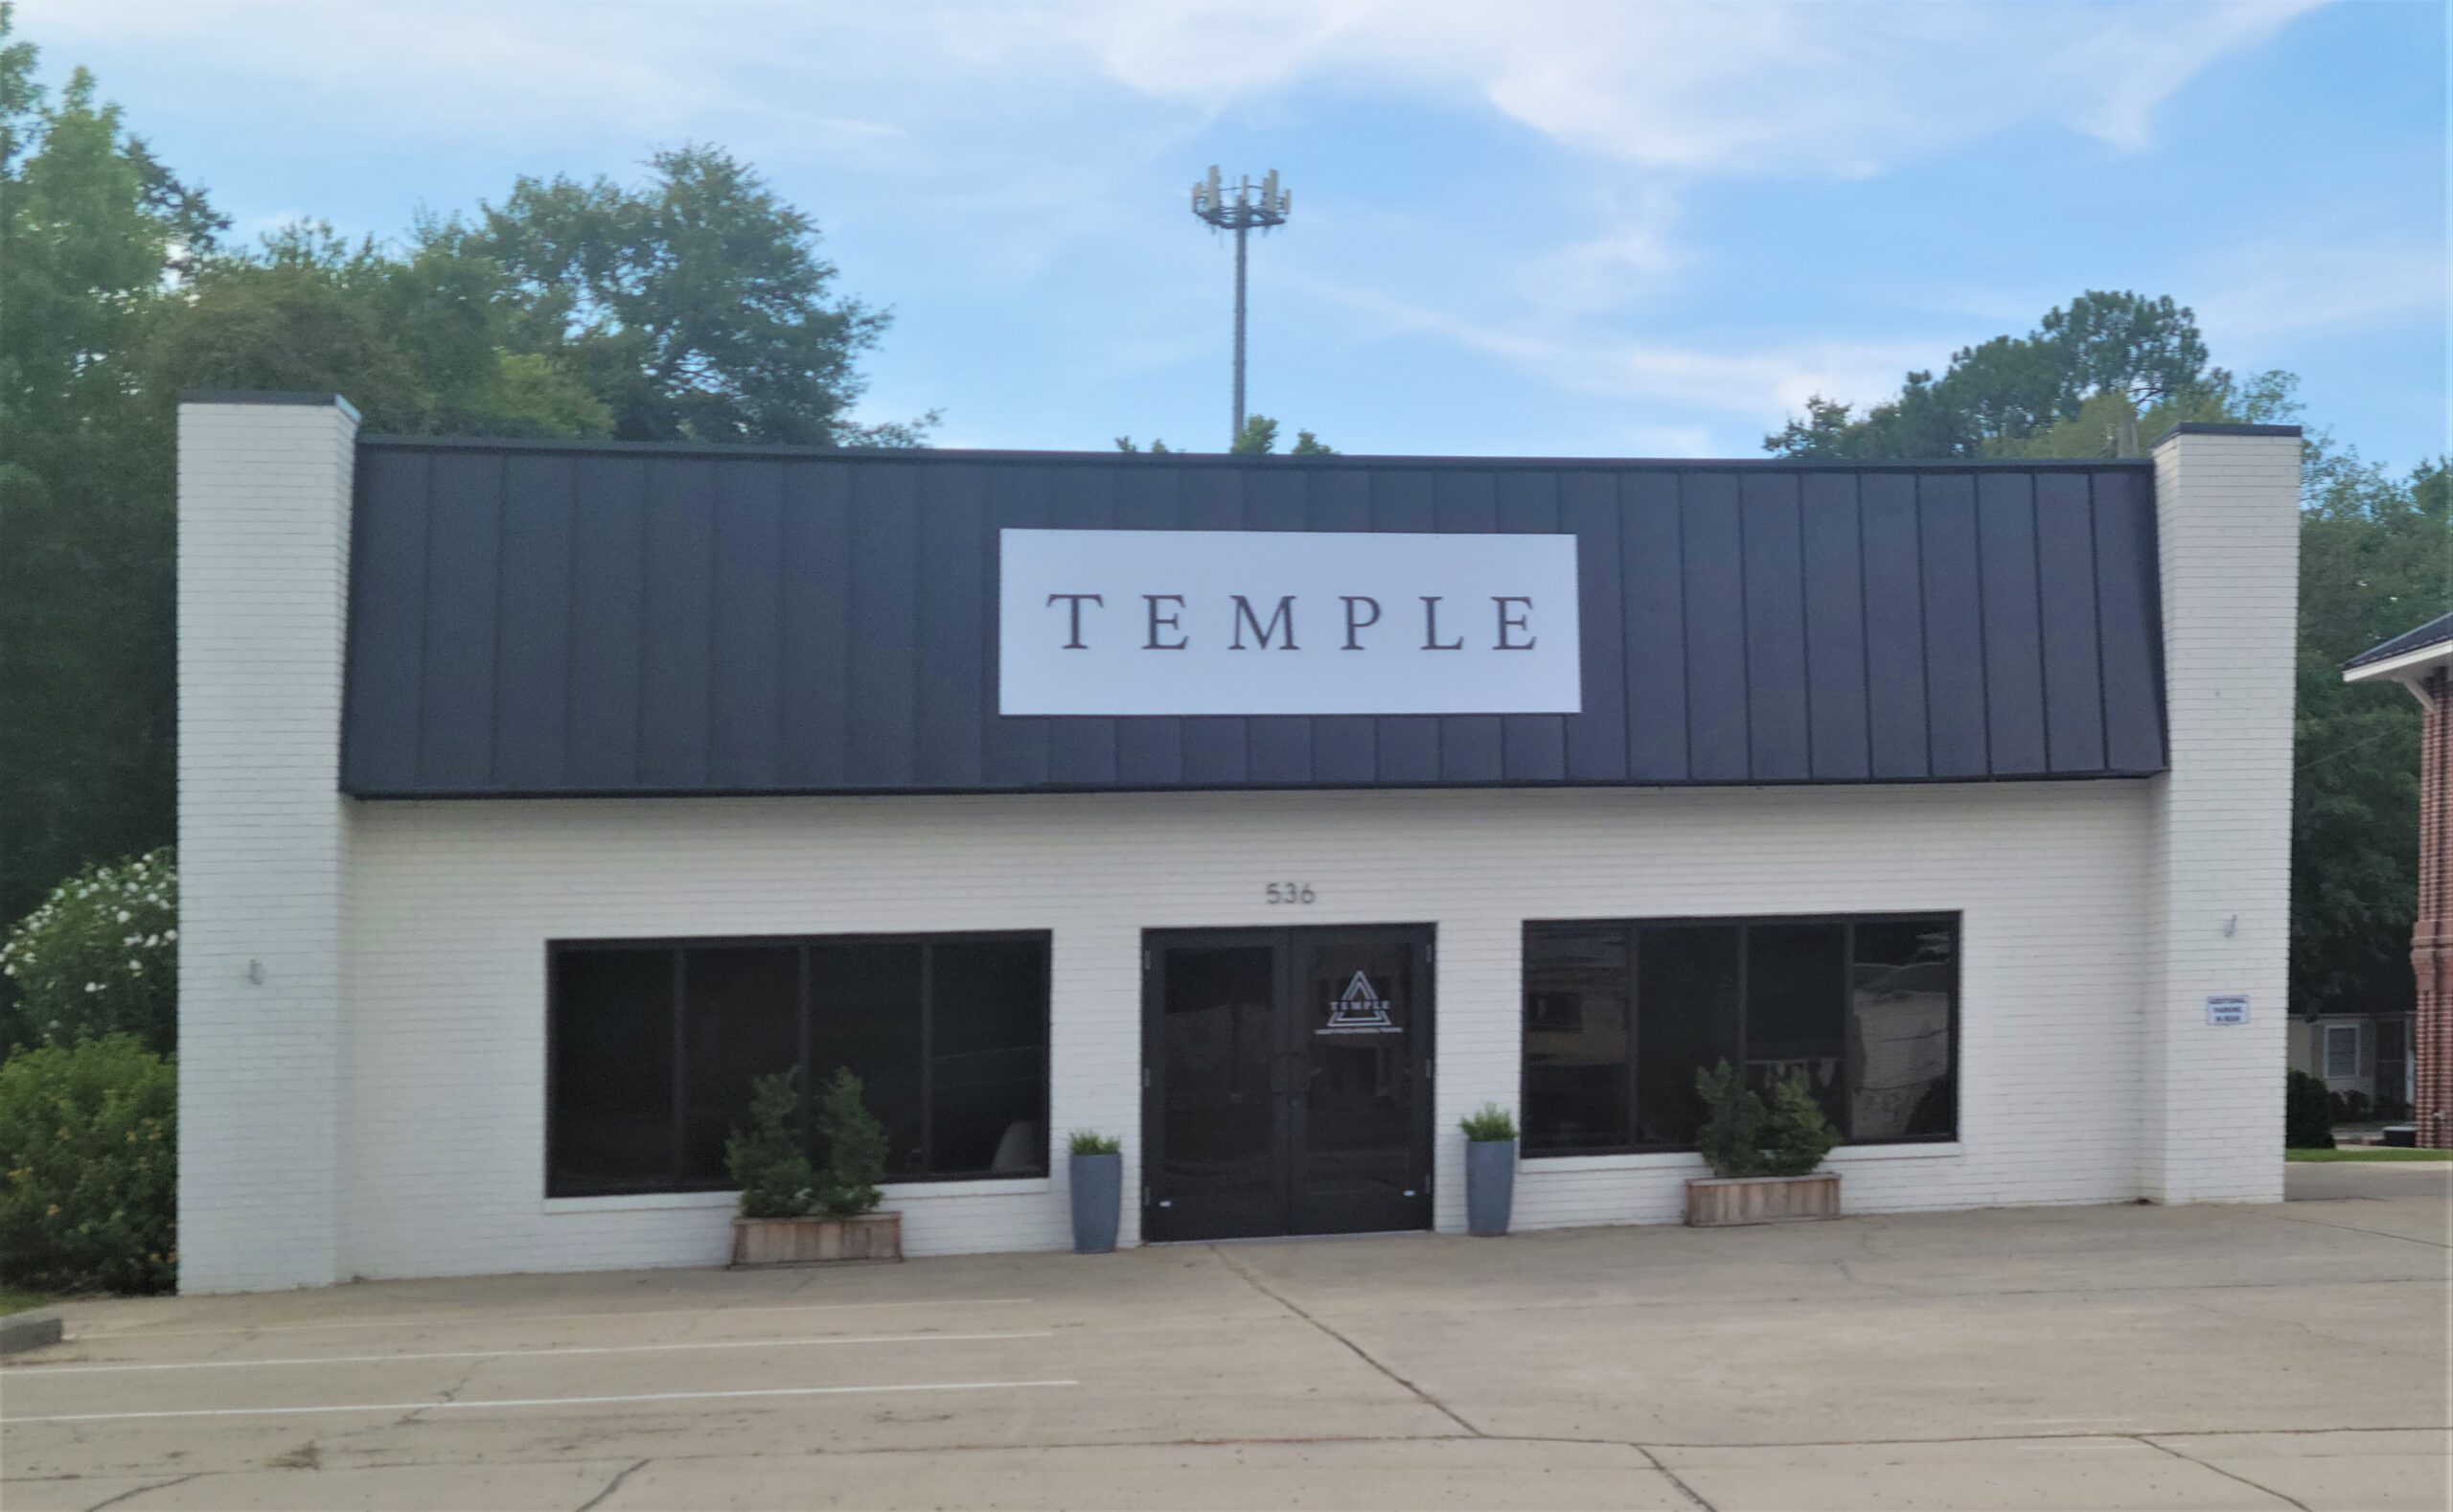 1-A-TEmple-